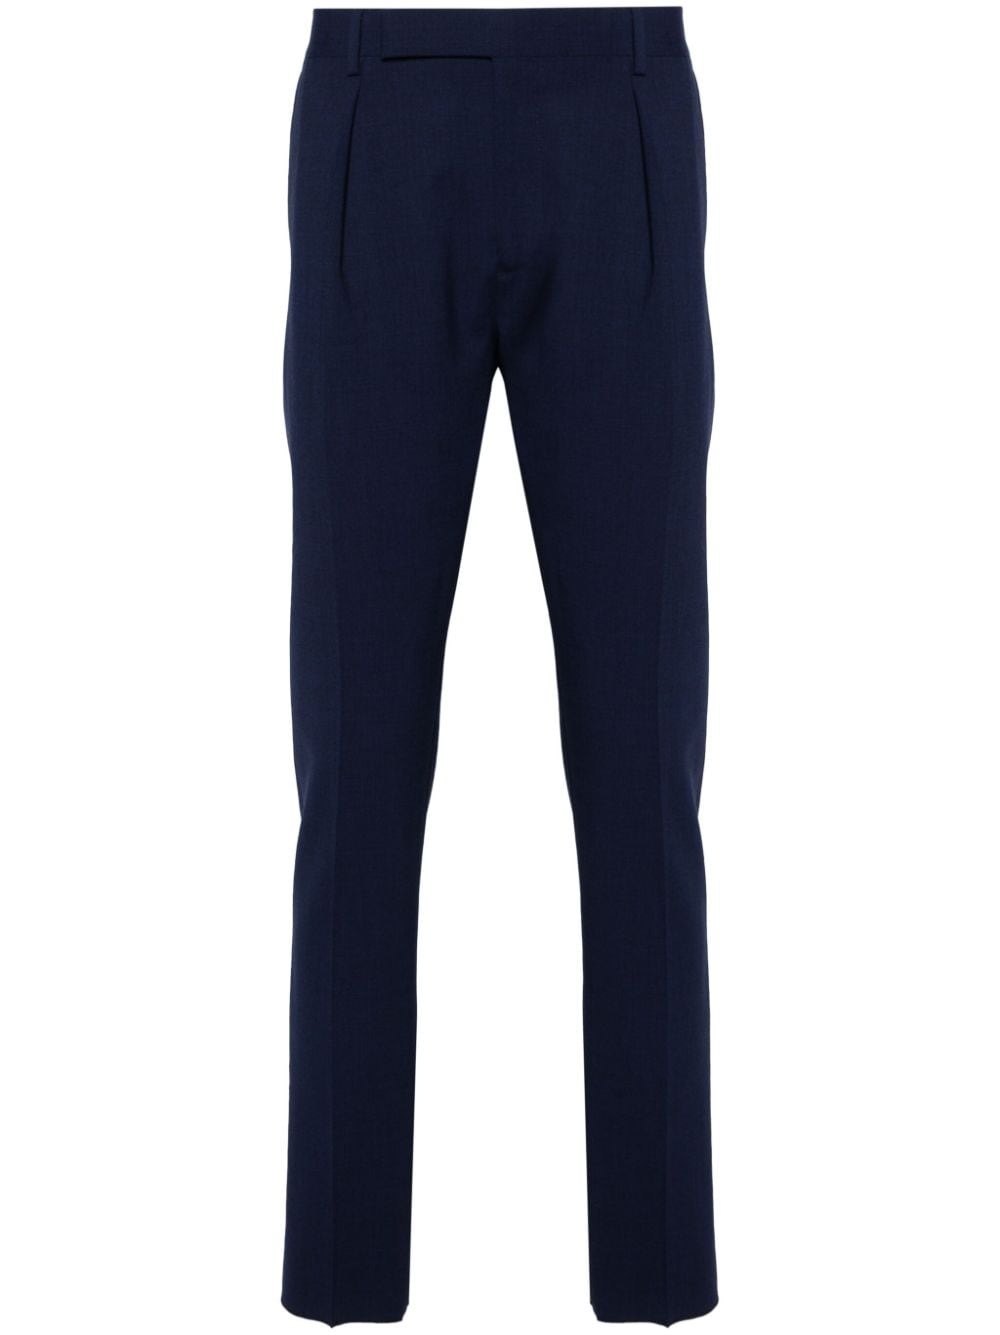 Paul Smith pleat-detail tailored trousers - Blue